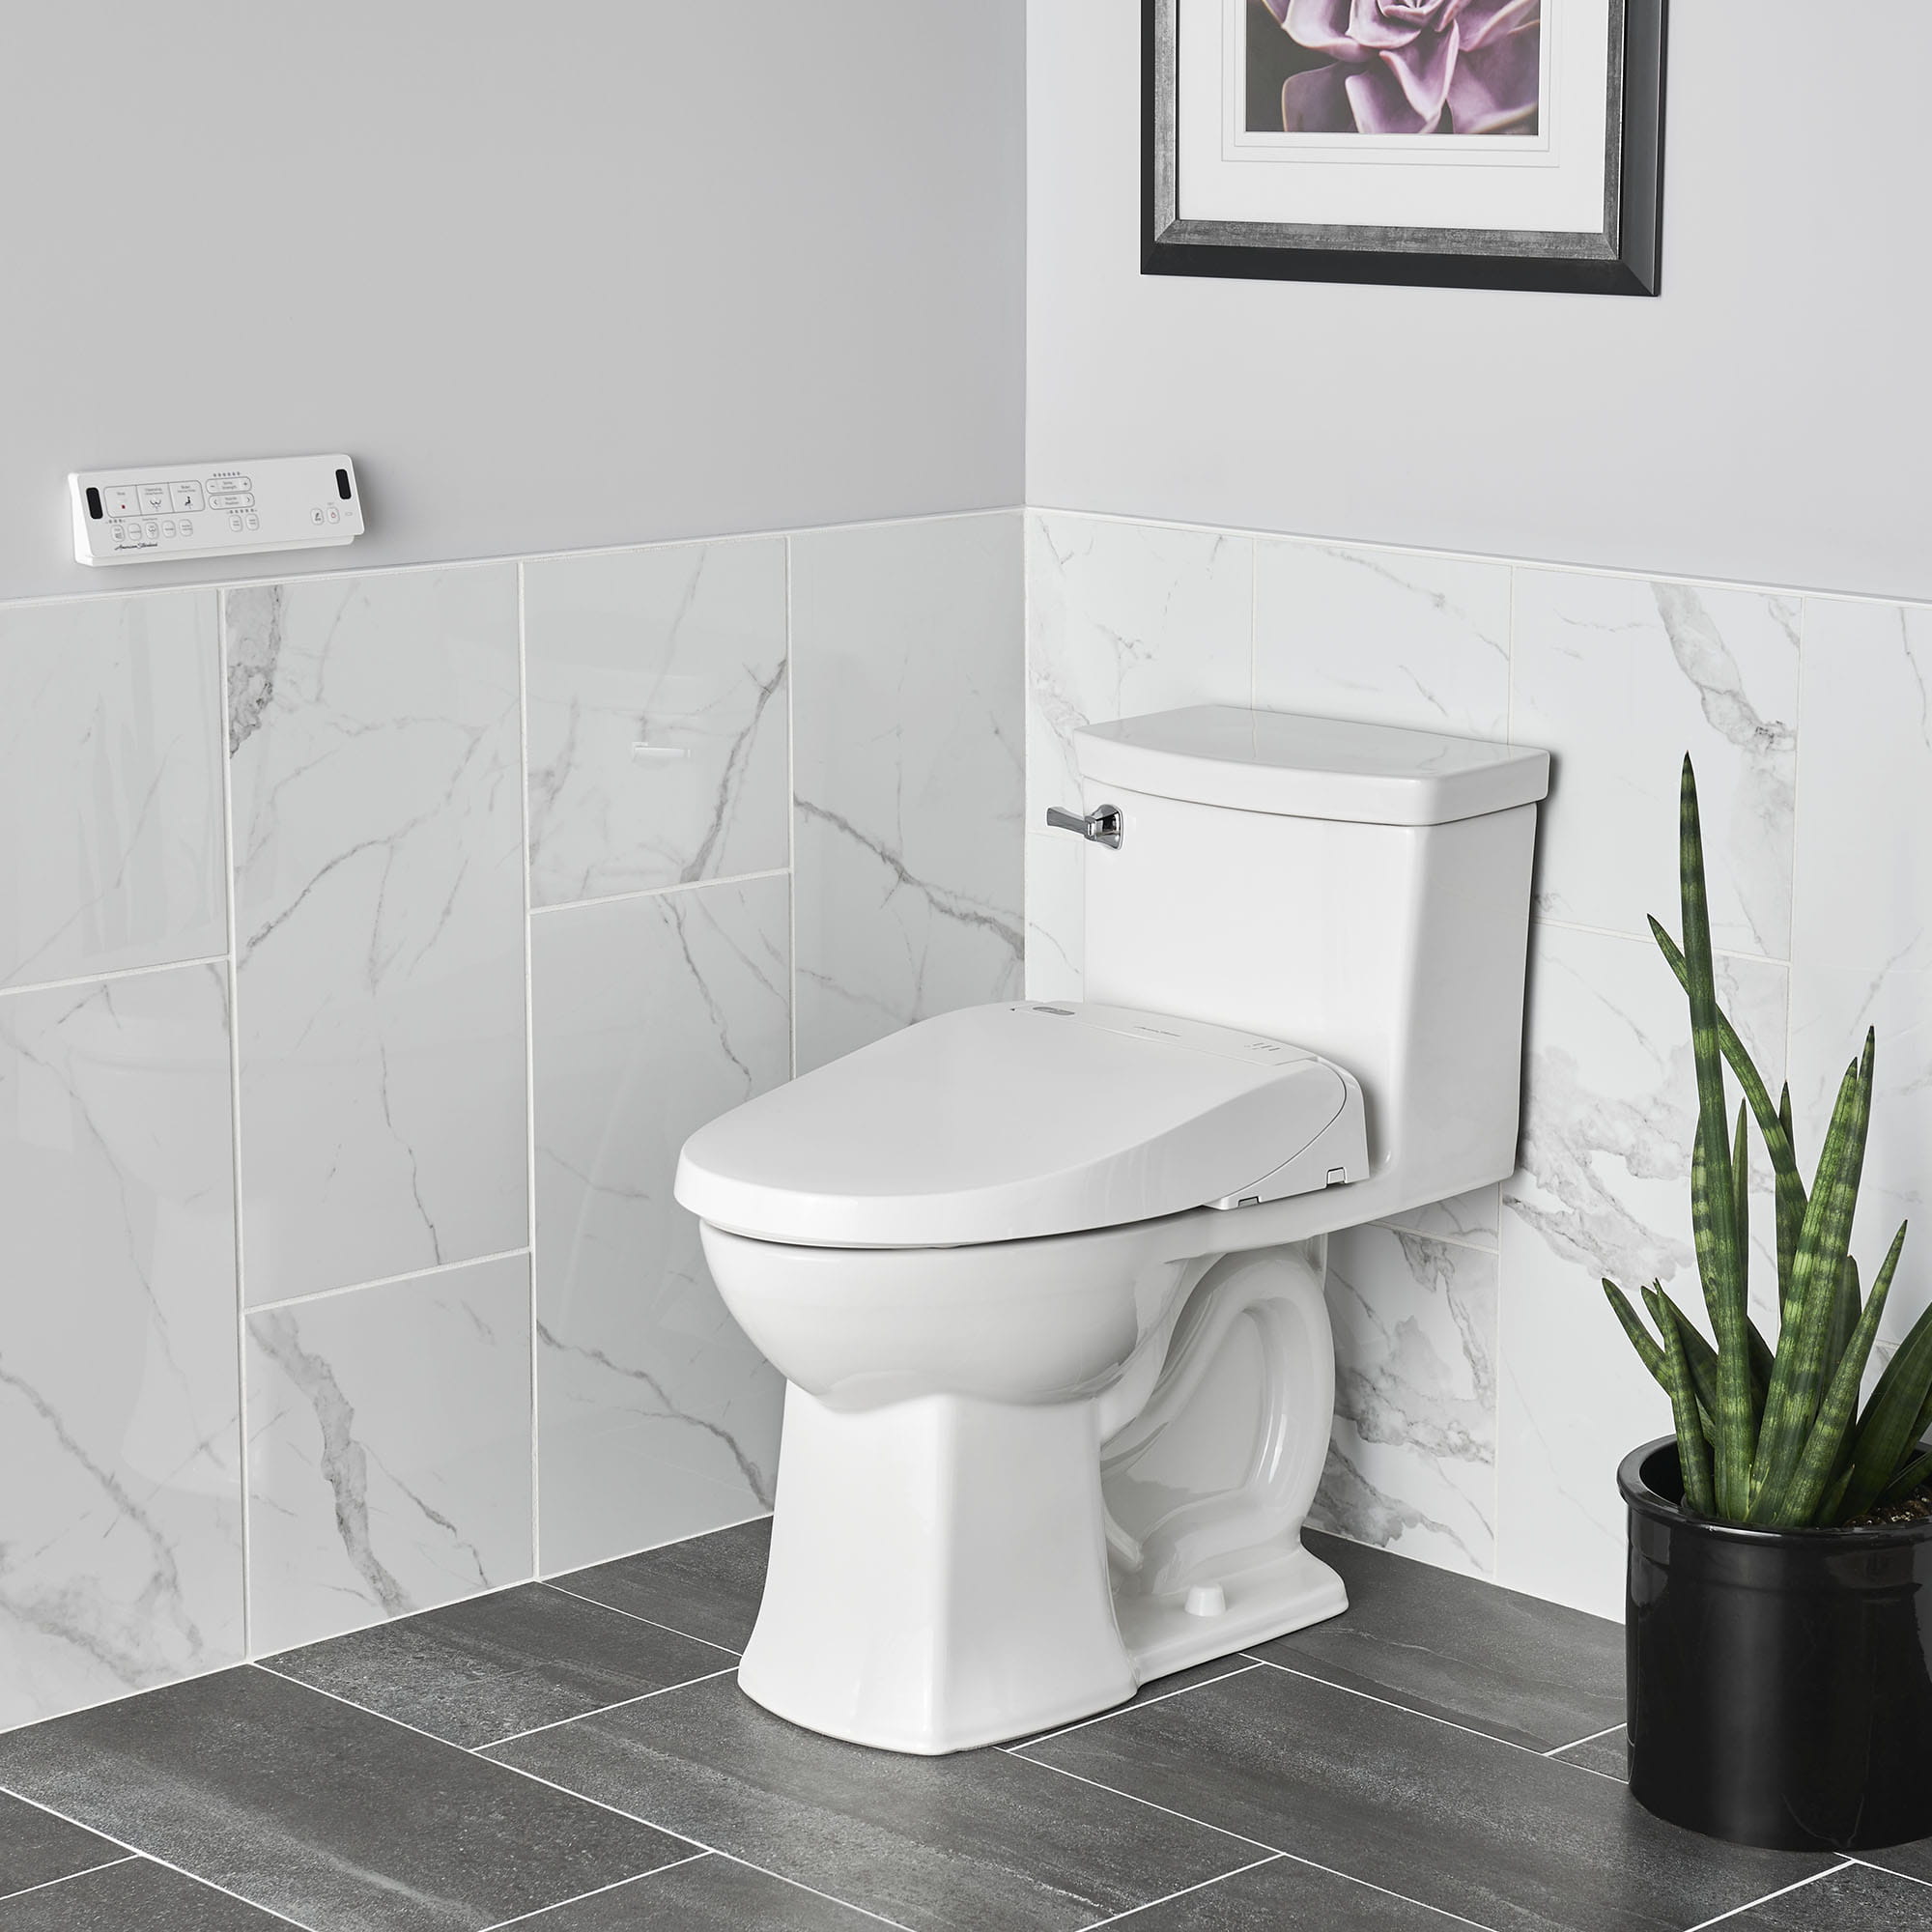 Advanced Clean 30 Electric SpaLet Bidet Seat With Remote Operation WHITE